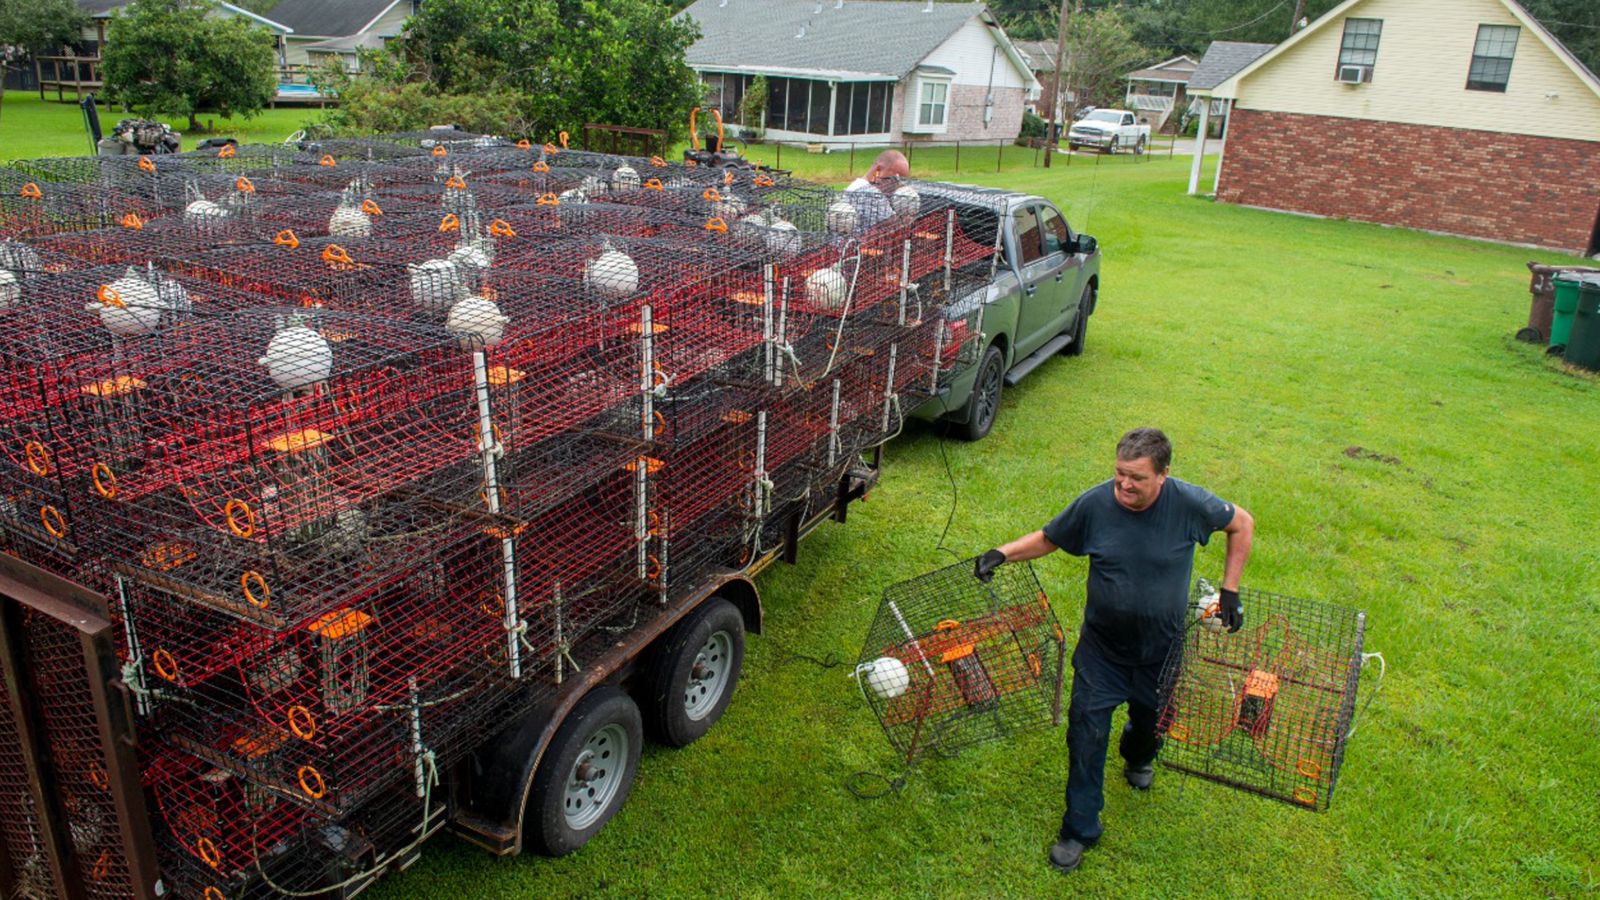 Ray Guenther, 55, bottom right, helps his brother, John, 56, unload about 400 crab traps that he had to pull out of the water and move via flatbed trailer to dry land near his home in eastern St. Bernard Parish as the Louisiana coast prepares for the arrival of Hurricane Ida on Friday, August 27, 2021, in New Orleans. (Chris Granger/The Times-Picayune/The New Orleans Advocate via AP)